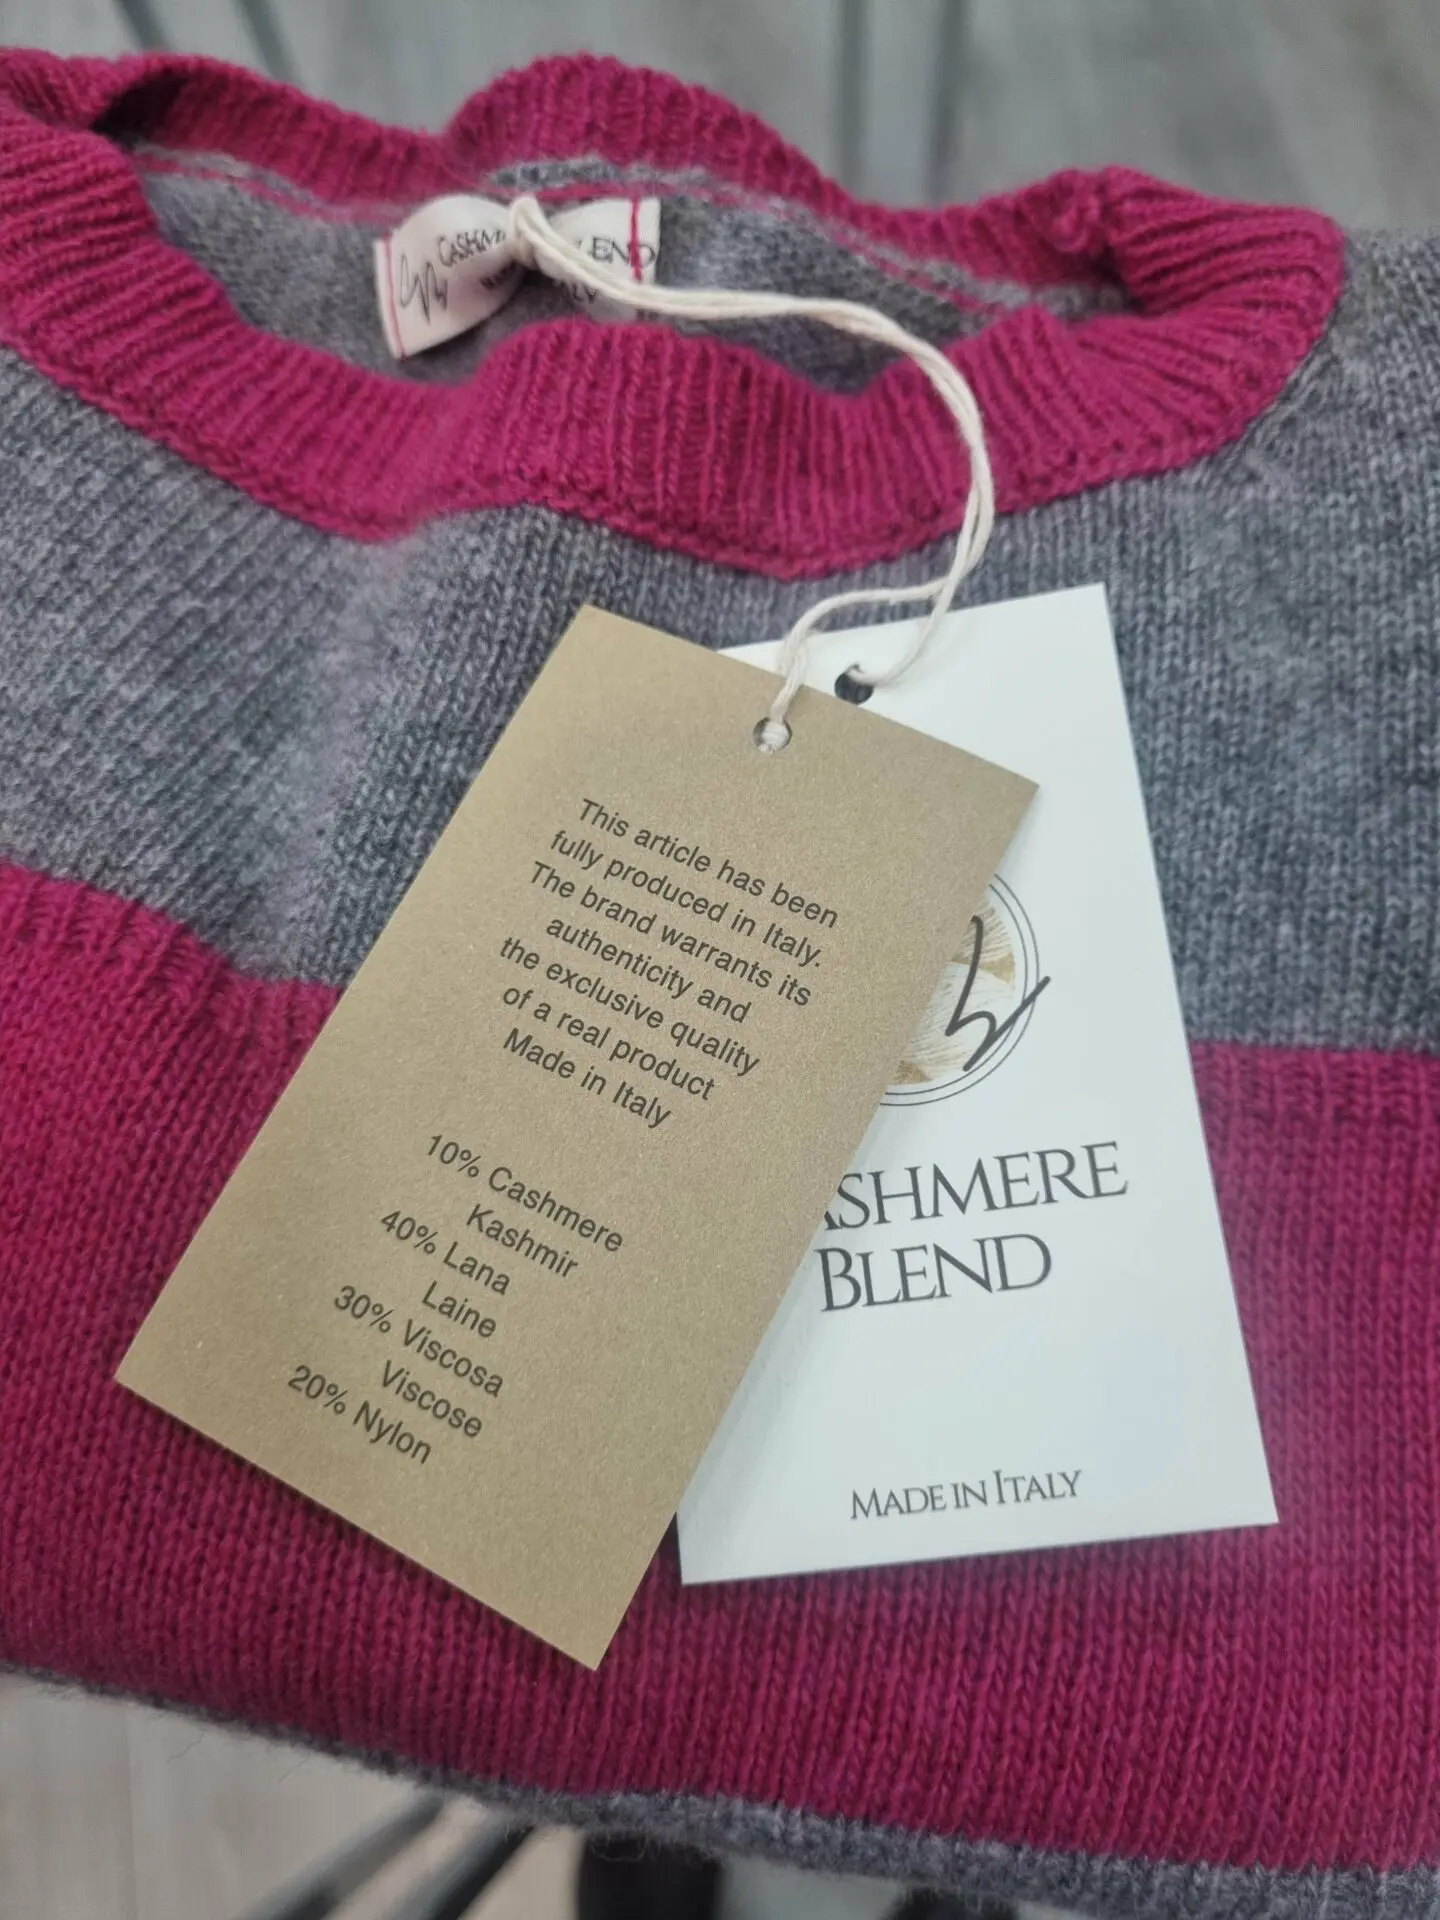 Warm crew-neck sweater in cyclamen and gray color – One size – Composition 10% cashmere, 40% wool, 30% viscose, 20% nylon – Made in Italy